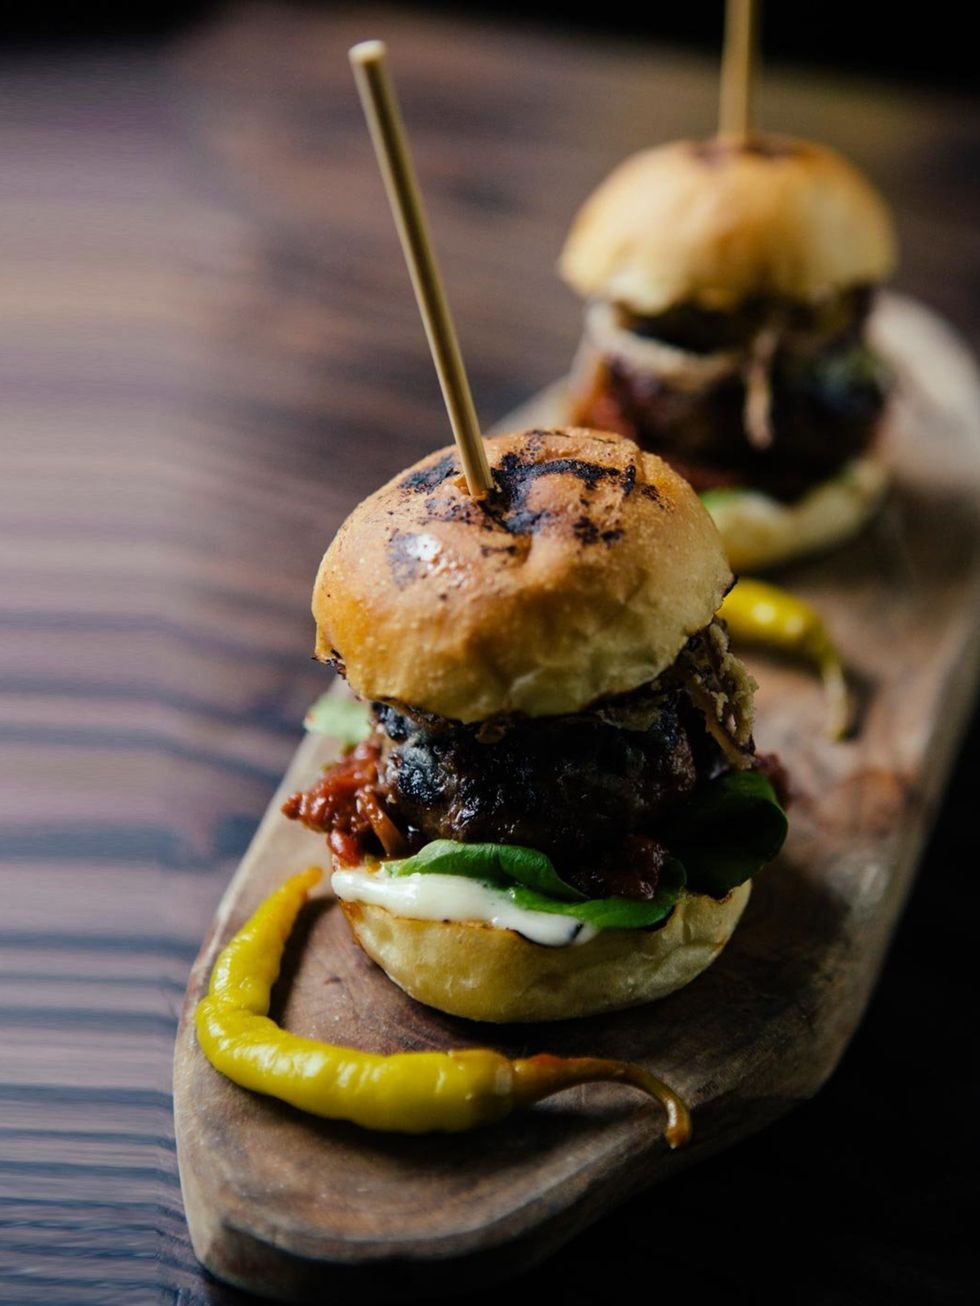 &lt;p&gt;&lt;strong&gt;Ember Yard&lt;/strong&gt;&lt;/p&gt;&lt;p&gt;&lt;strong&gt; &lt;/strong&gt;&lt;/p&gt;&lt;p&gt;Hot new restaurant Ember Yard opens this week &ndash; the fourth venture from the guys behind established favourites Salt Yard and Opera Ta